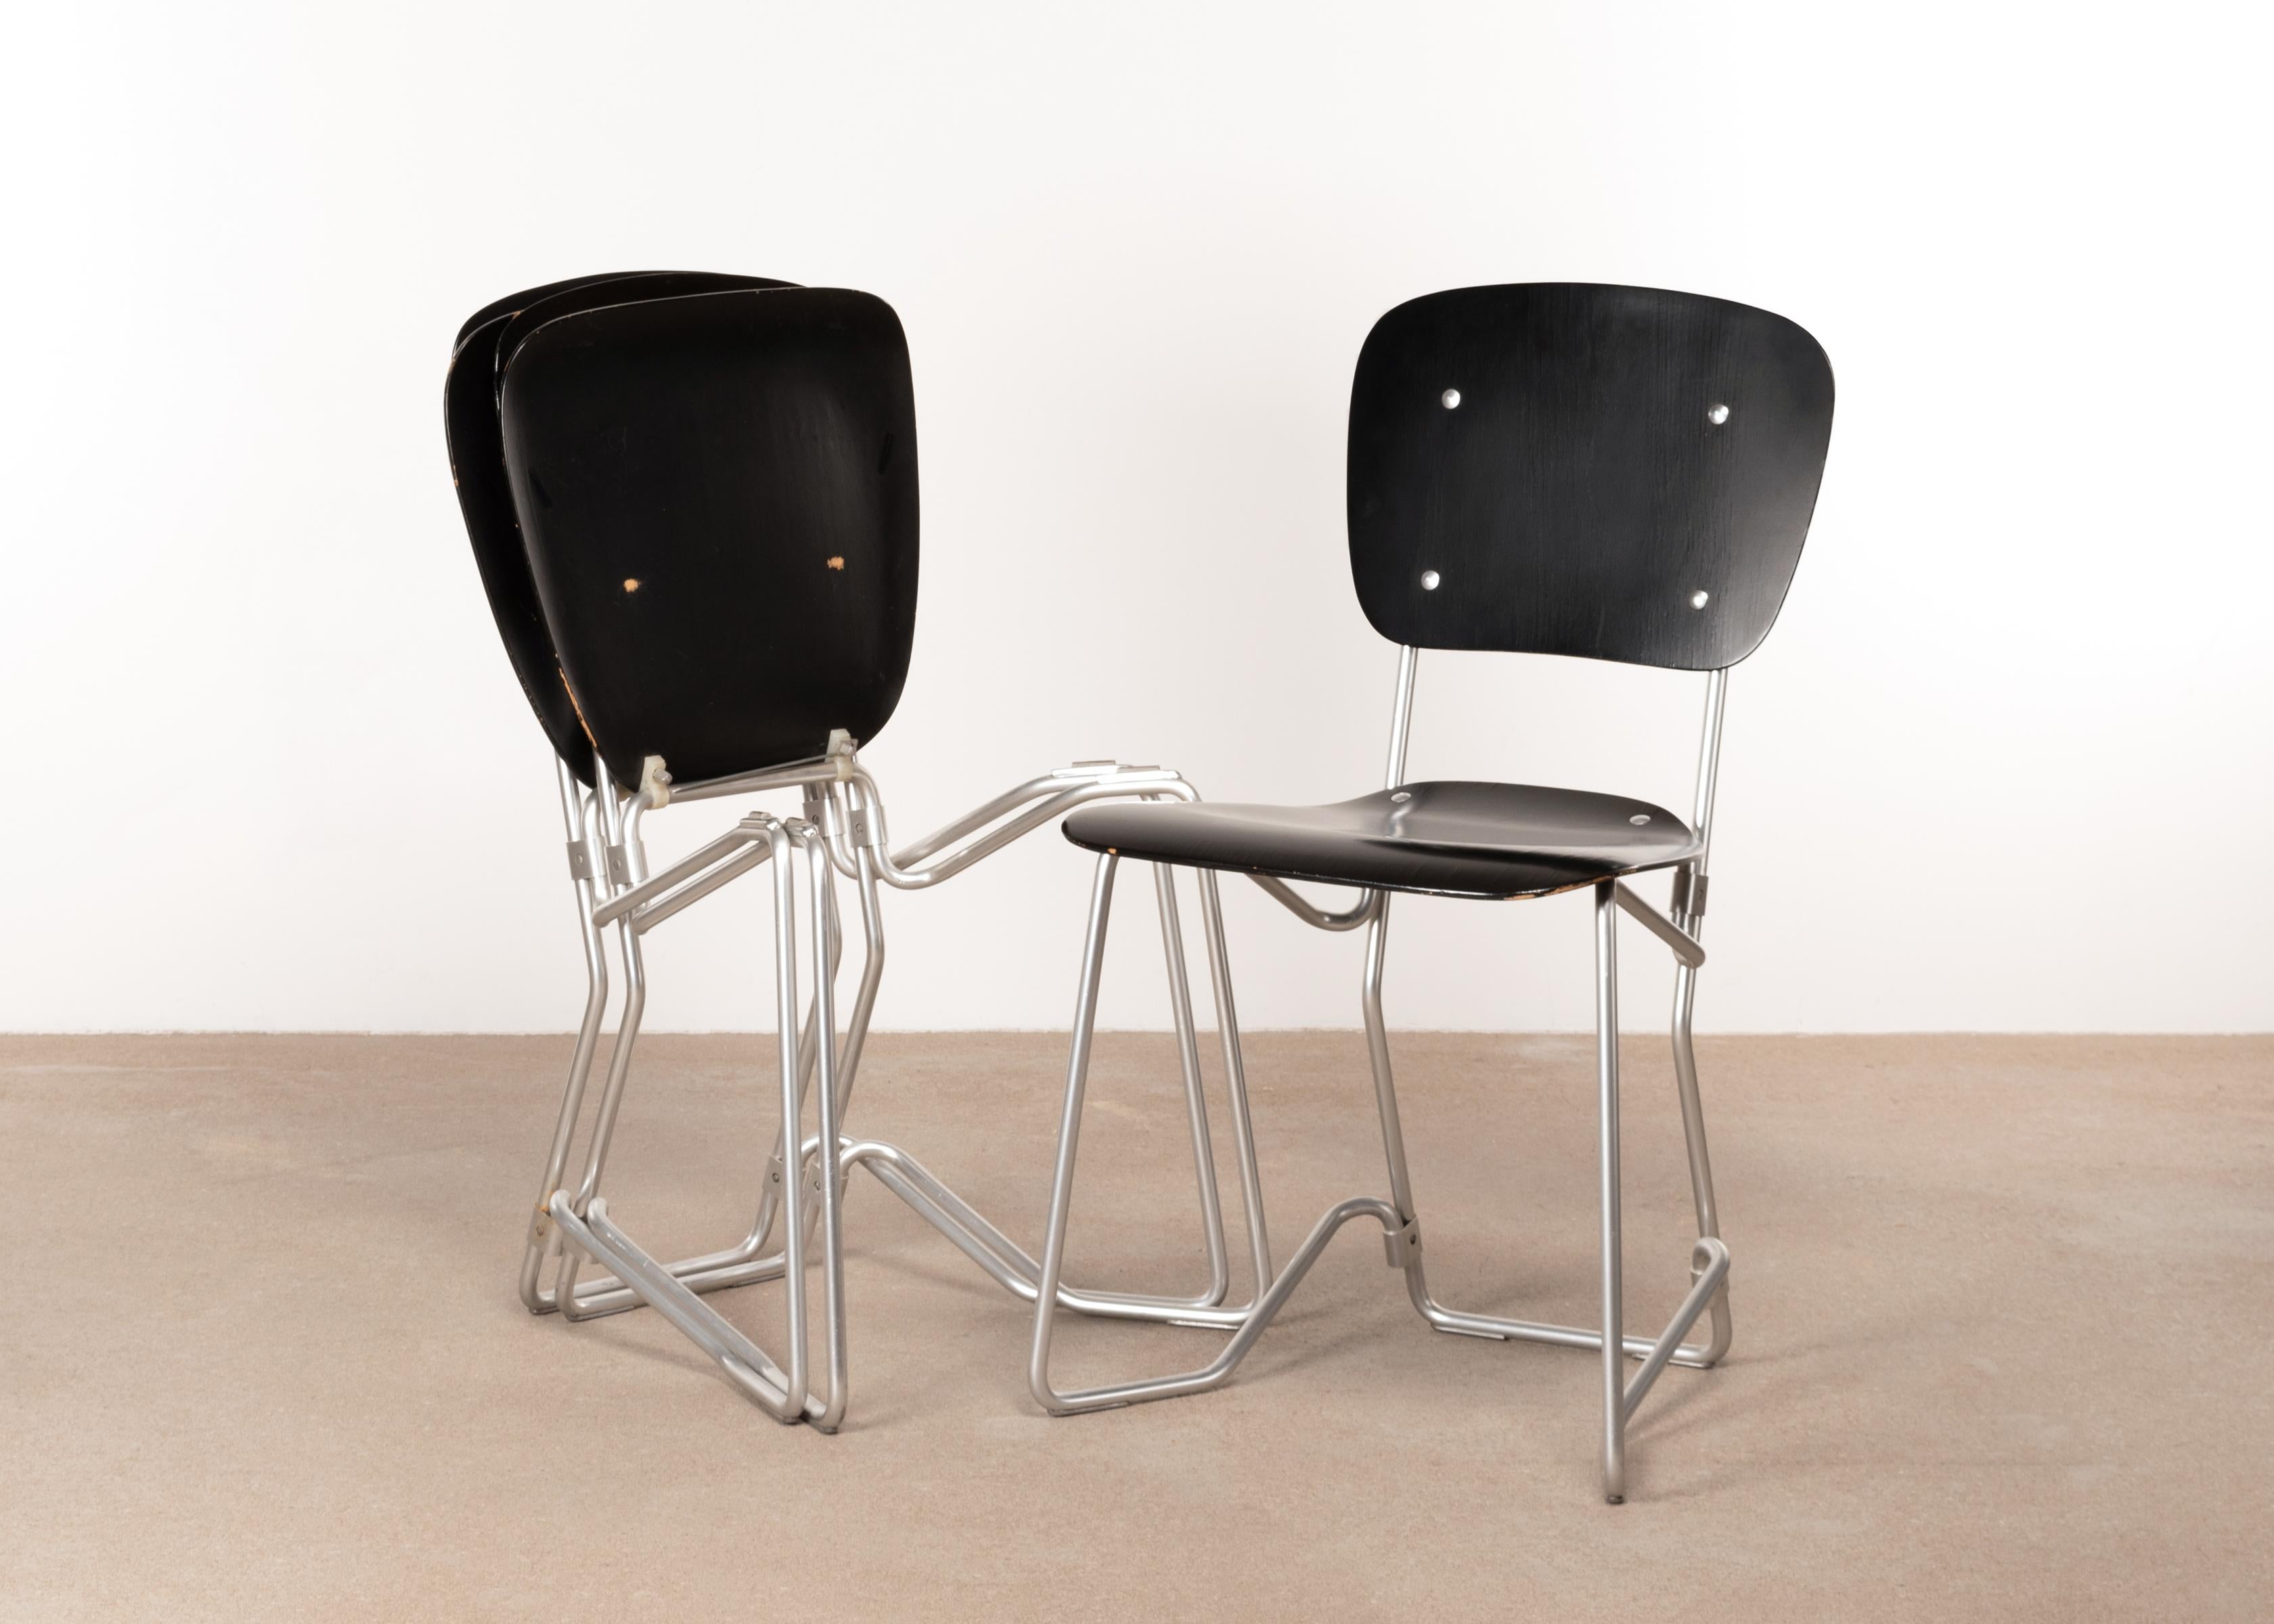 Swiss Armin Wirth Early Folding Stacking Chair in Black Plywood / Aluminum for Aluflex